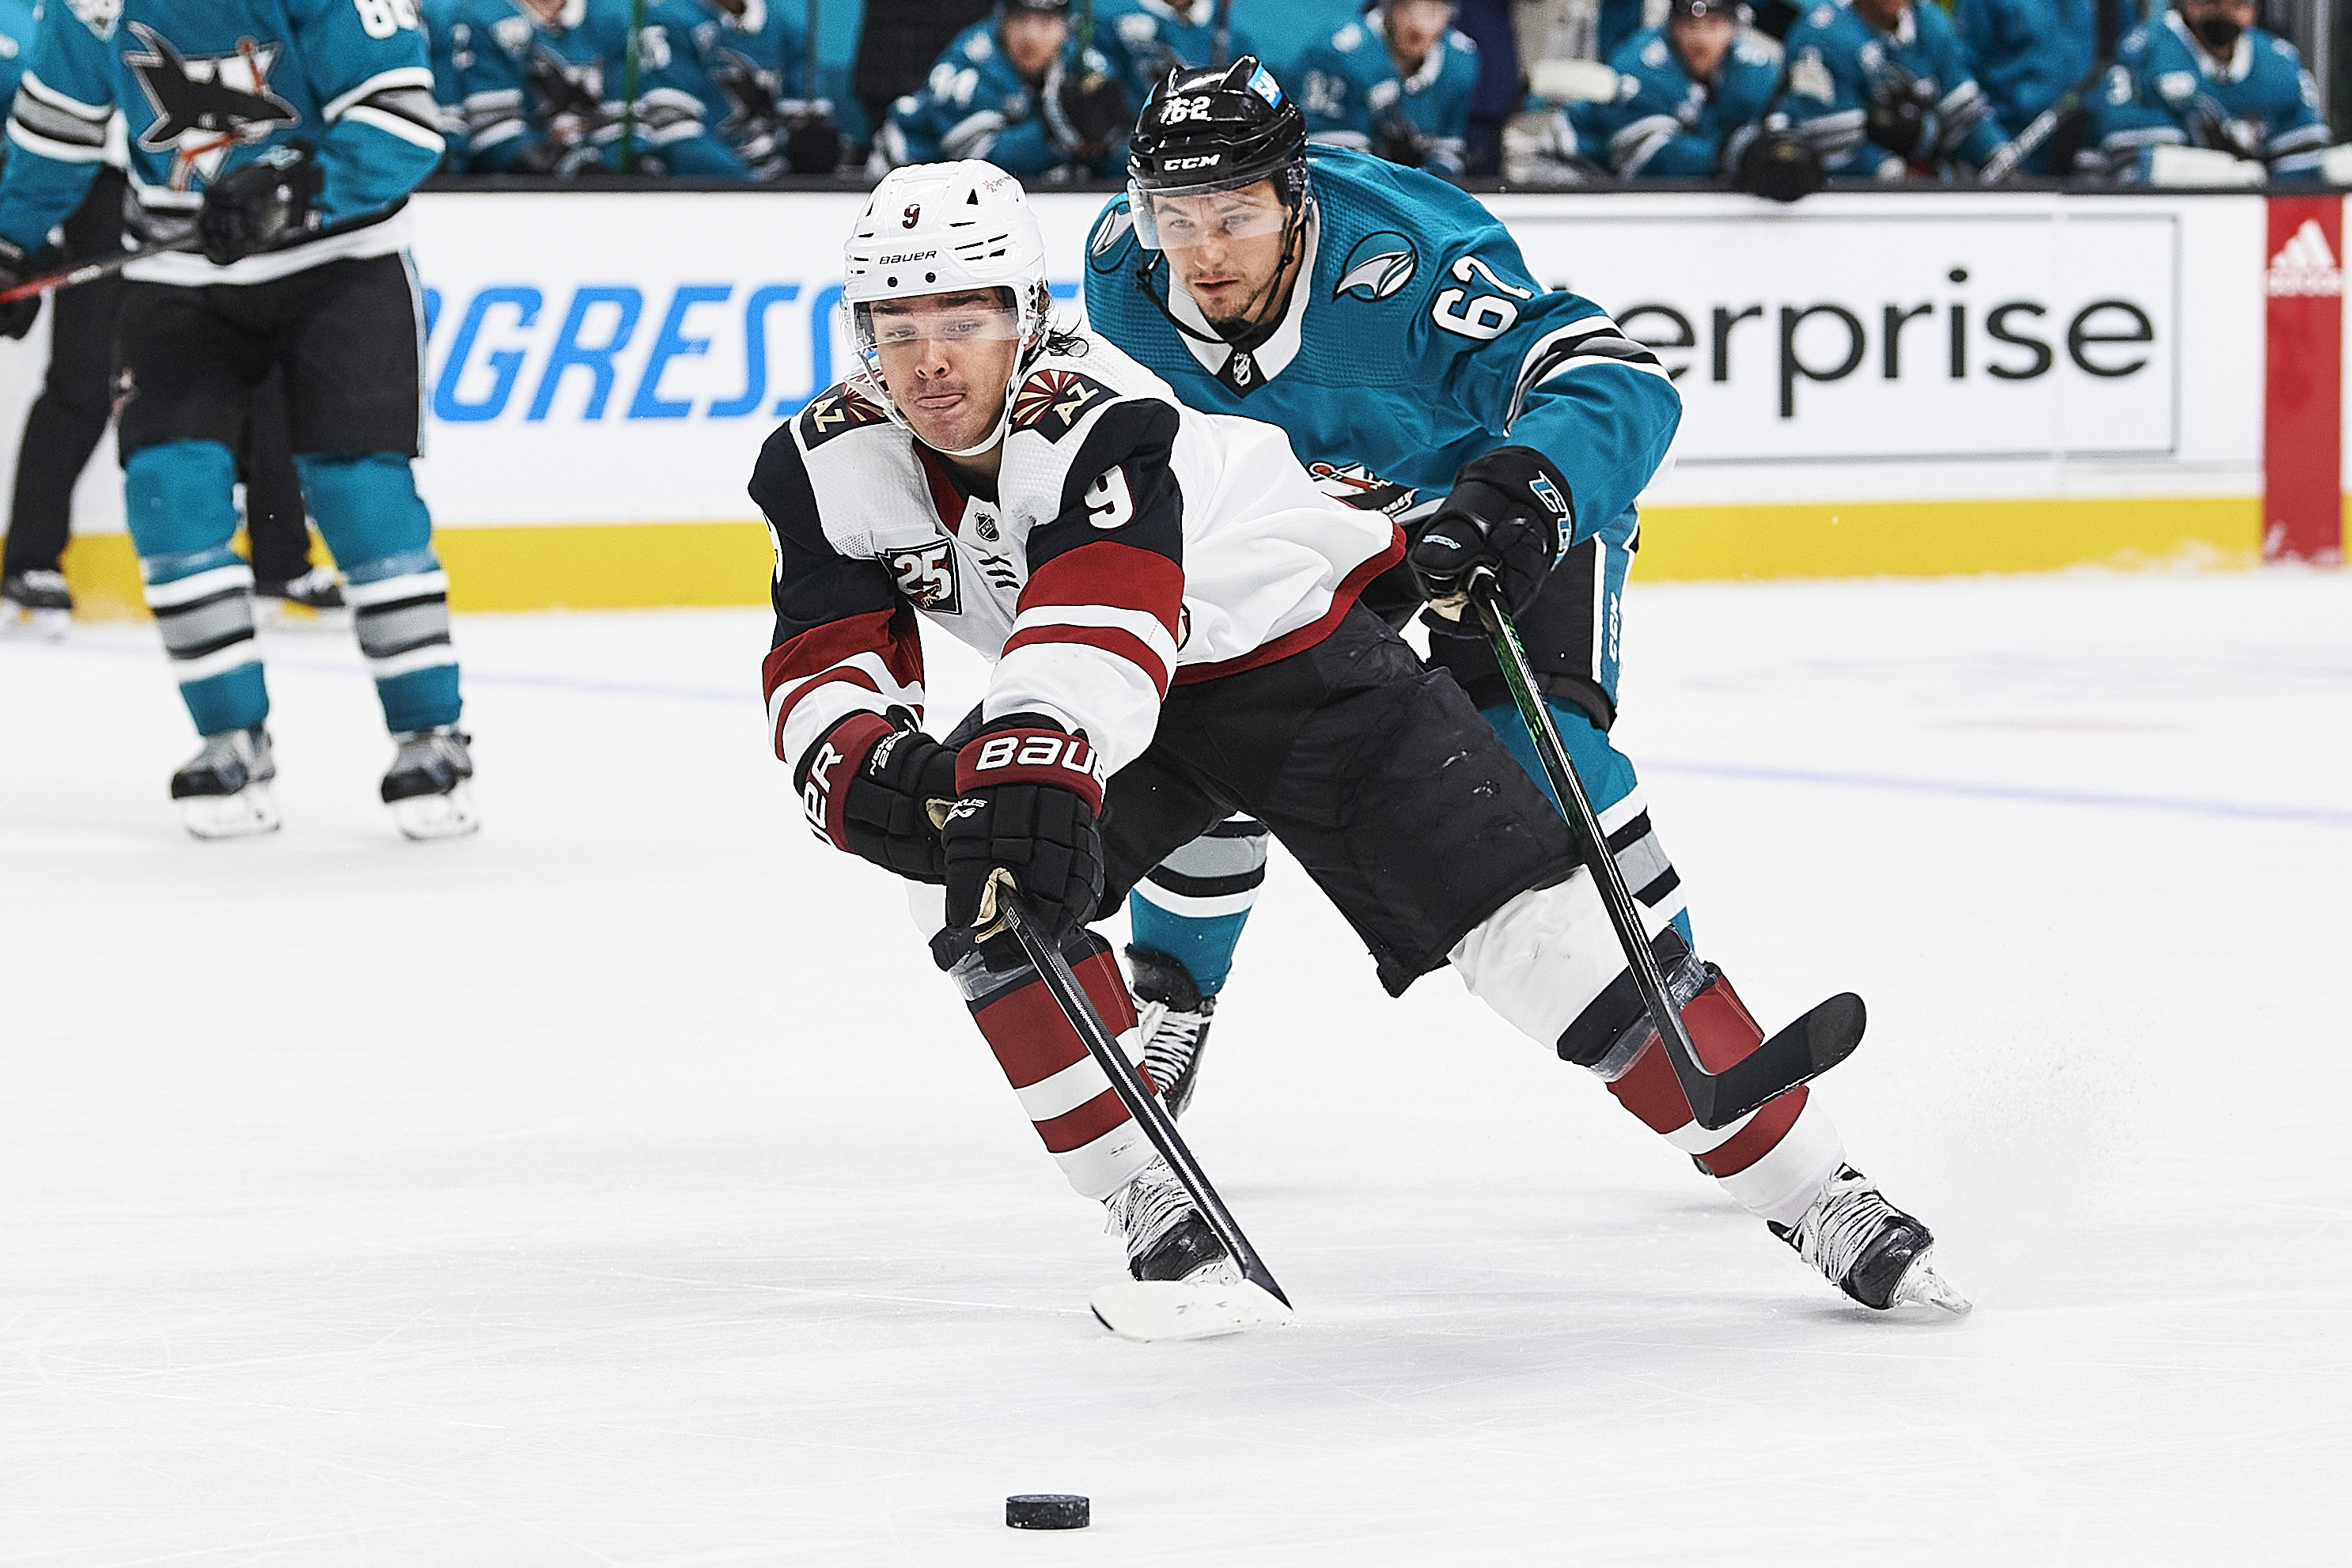 Arizona Coyotes right wing Clayton Keller (9) keeps the puck away from San Jose Sharks right wing Kevin Labanc (62) during the San Jose Sharks game versus the Arizona Coyotes on May 8, 2021, at SAP Center at San Jose in San Jose, CA.